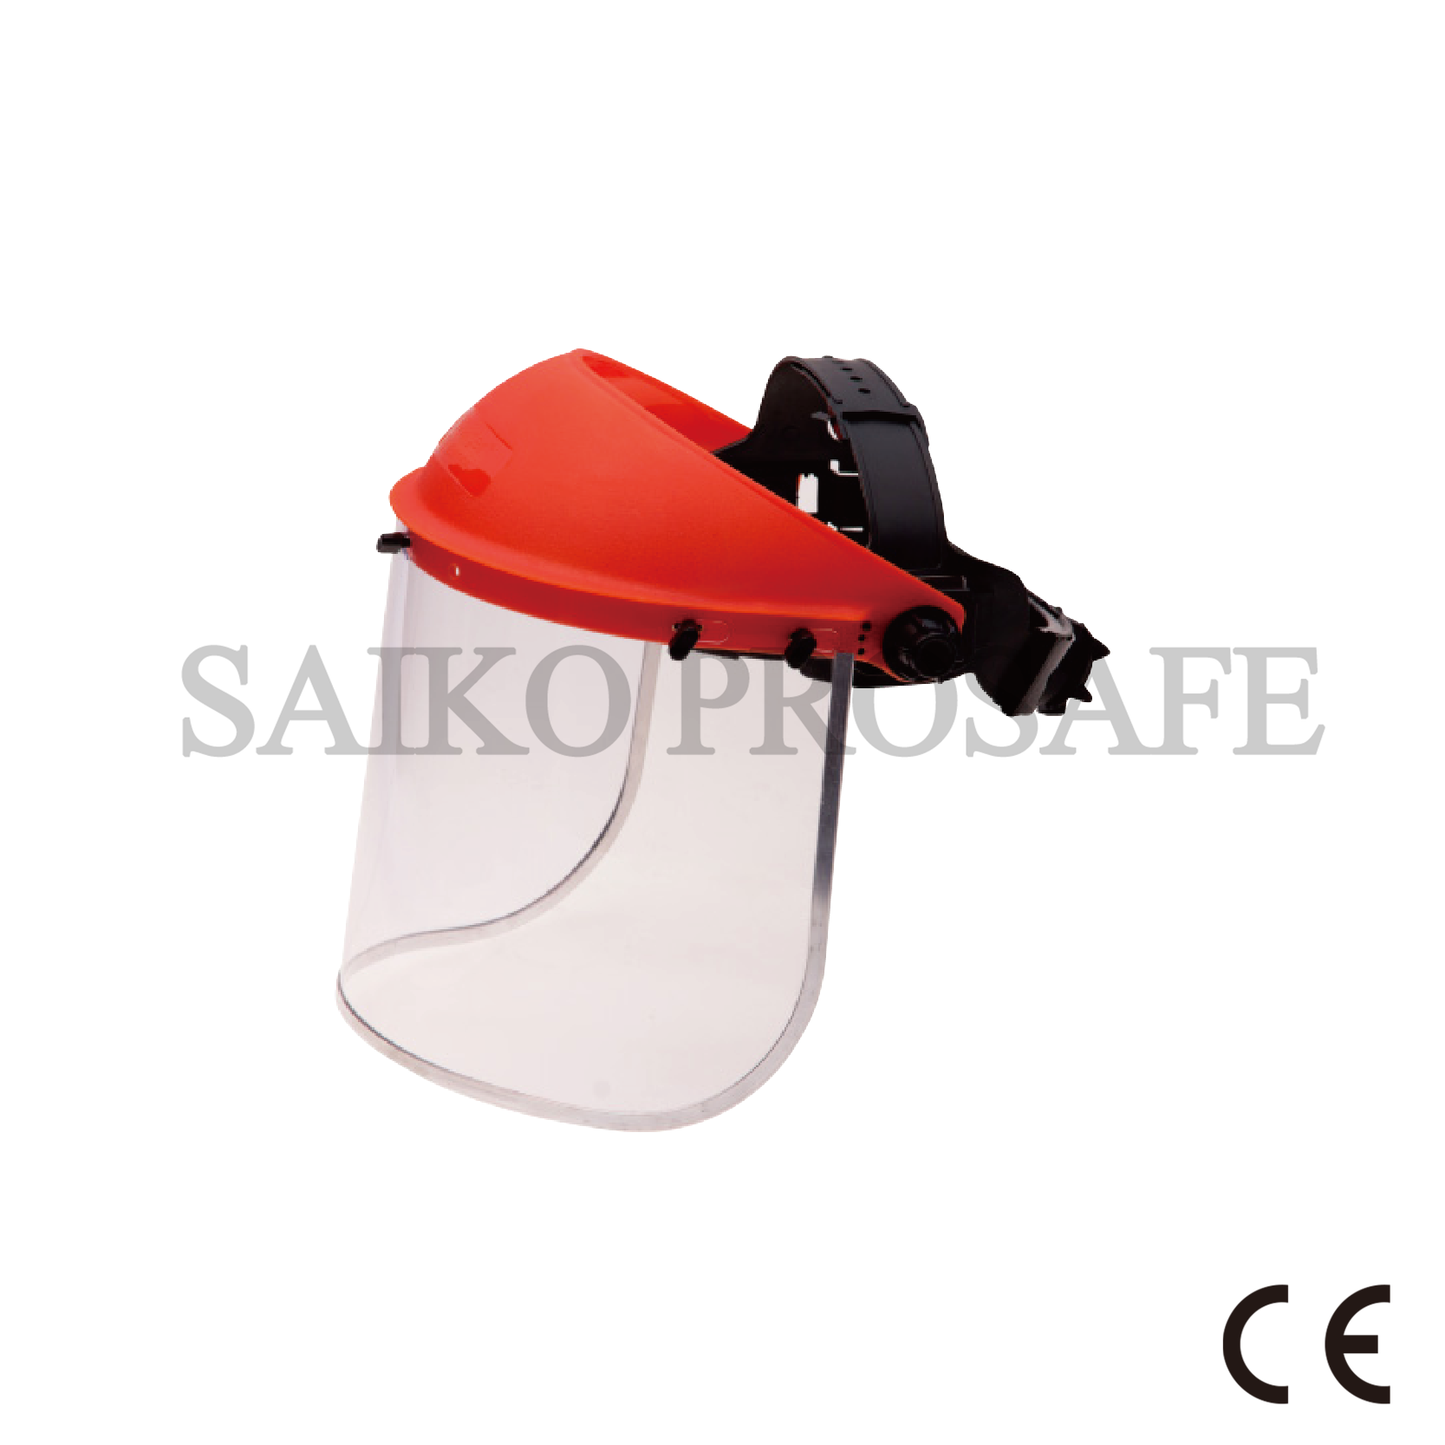 Face Shield - Clear Window with Aluminum Binding - Comfortable Ratcheting Headgear KM1504019-P